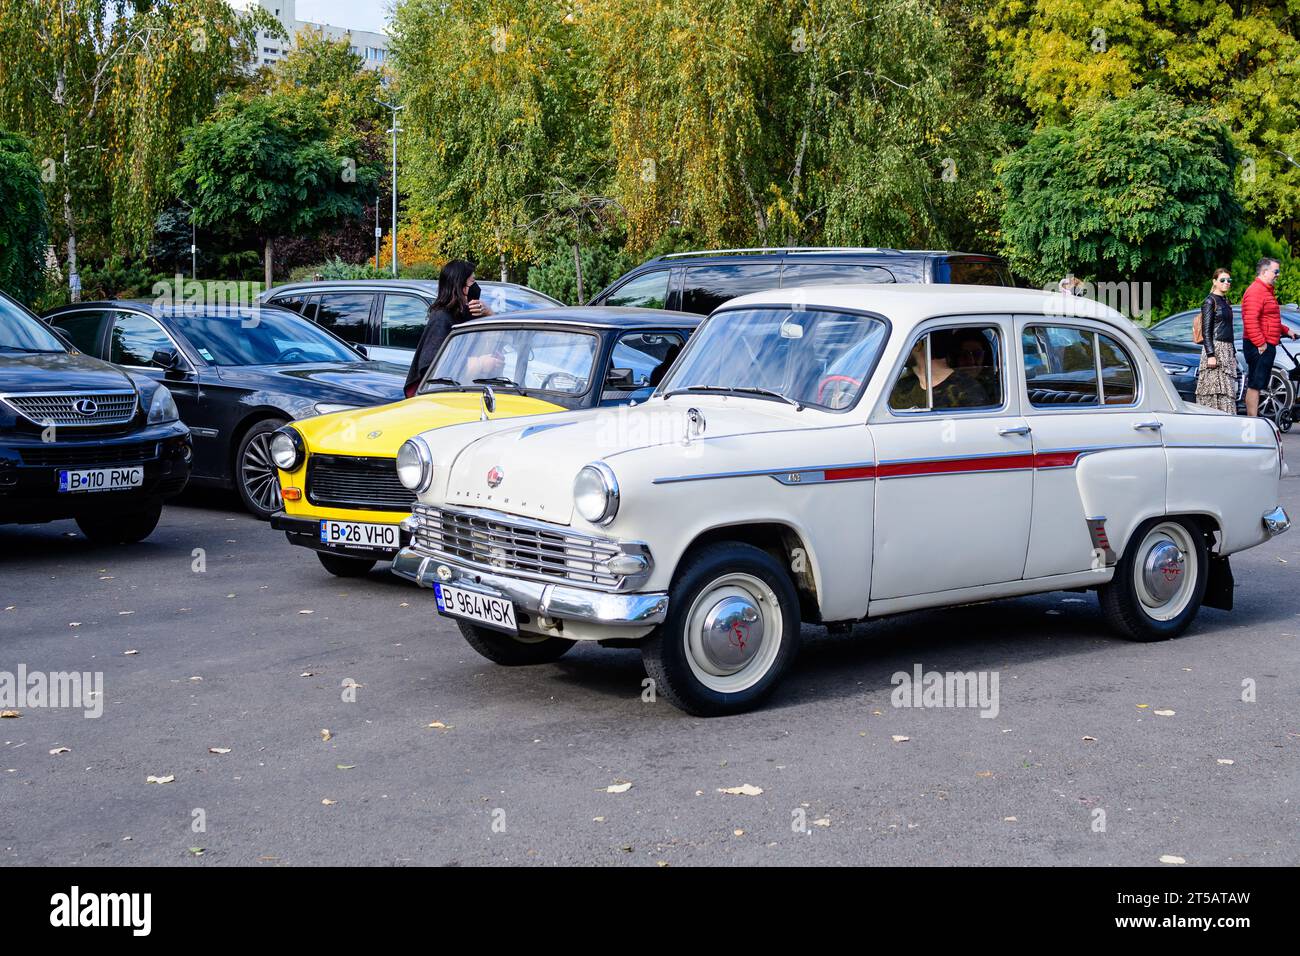 Bucharest, Romania, 24 October 2021: One vivid white Moskvitch 403 Russian vintage car in traffic in a street in the city center, in a sunny autumn da Stock Photo